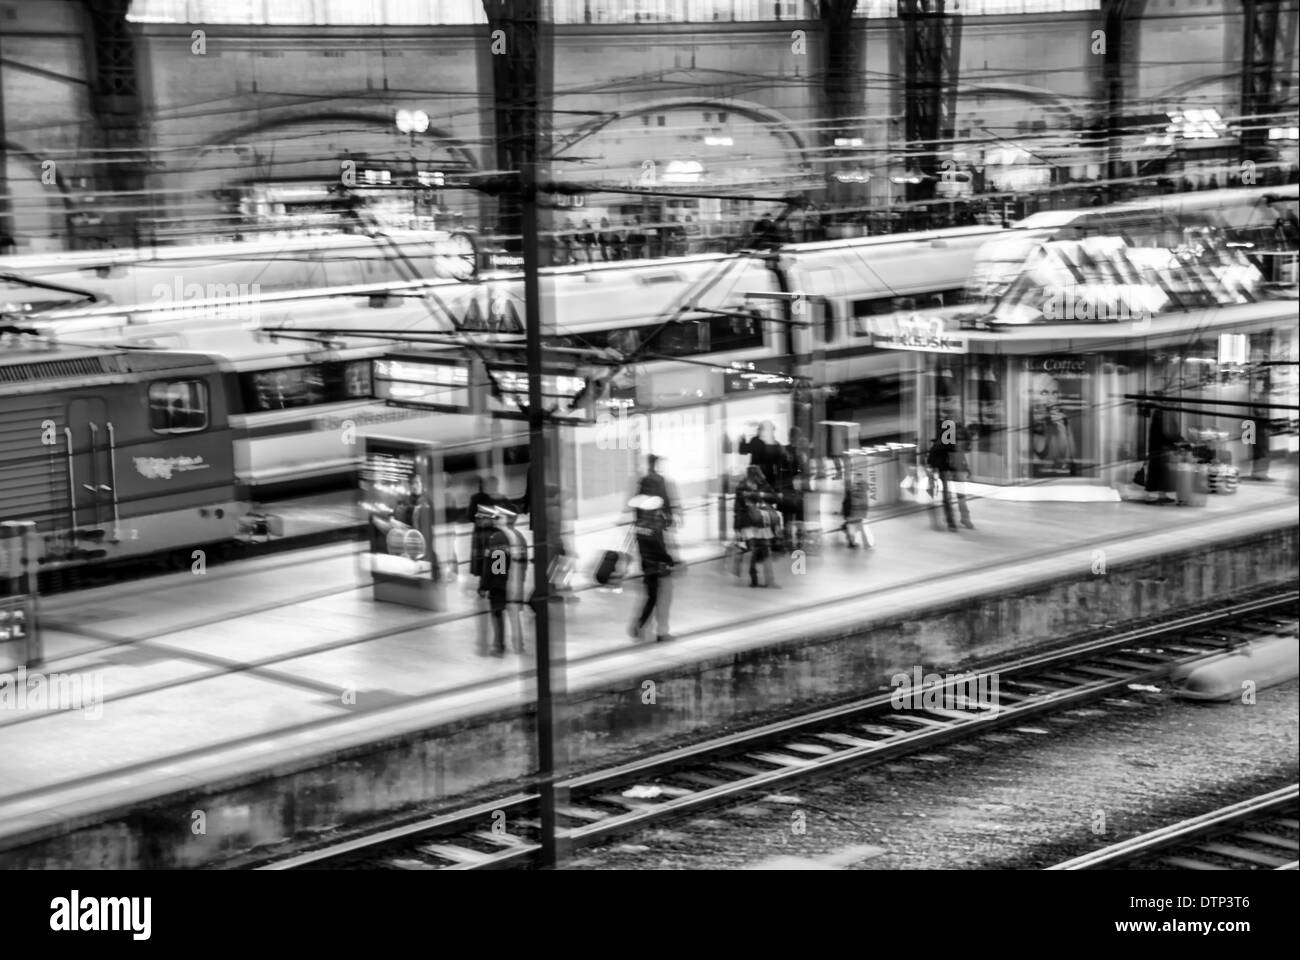 People boarding train Black and White Stock Photos & Images - Alamy